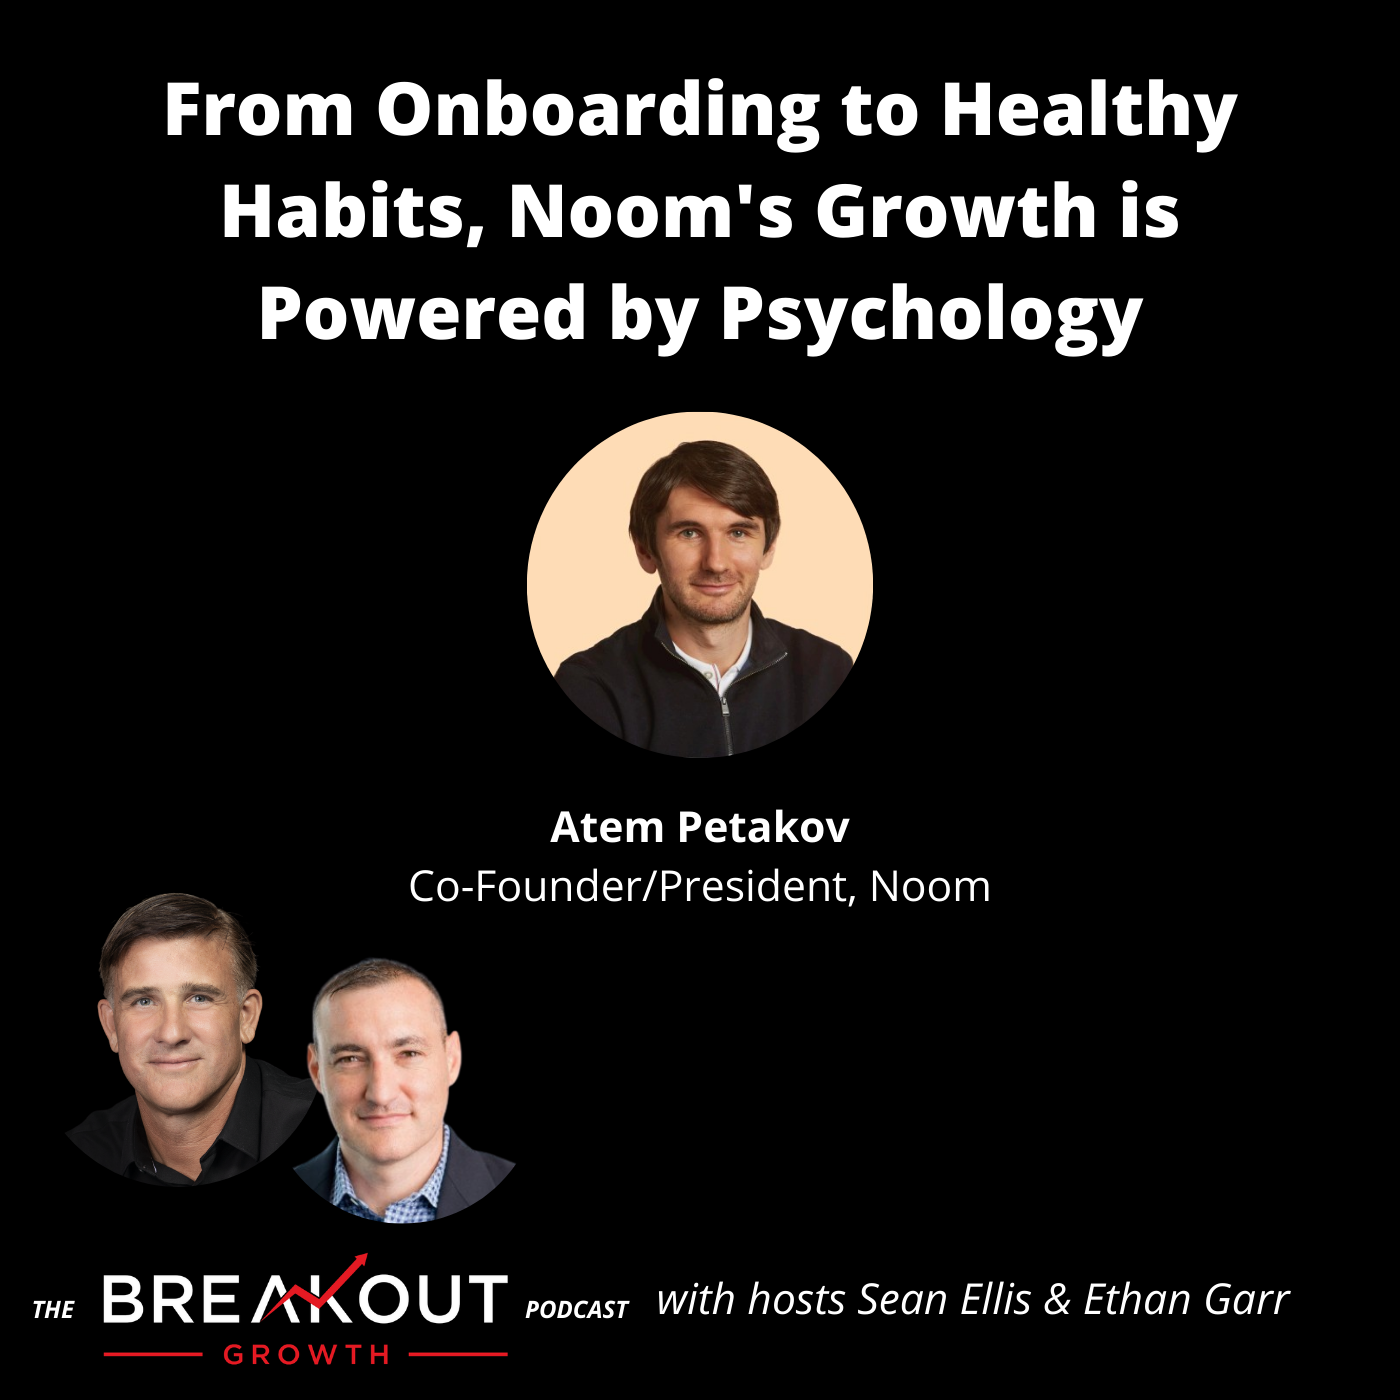 From Onboarding to Healthy Habits, Noom's Growth is Powered by Psychology